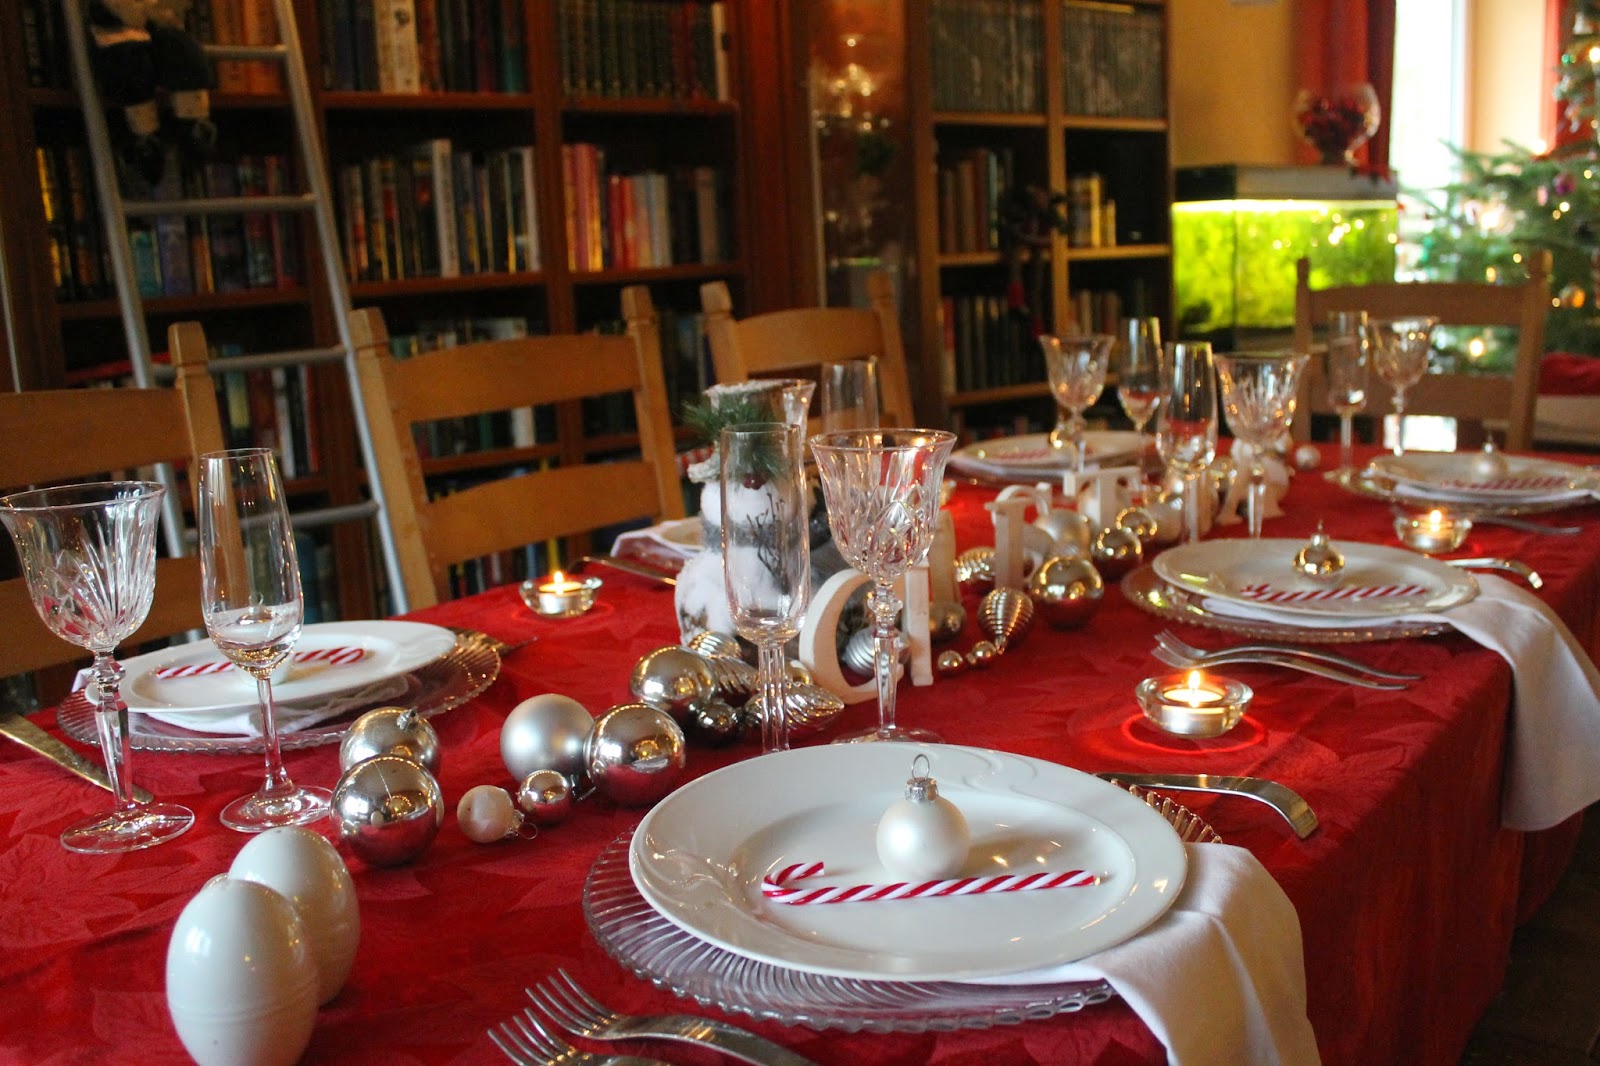 SupperTableTalk: Christmas.....another view